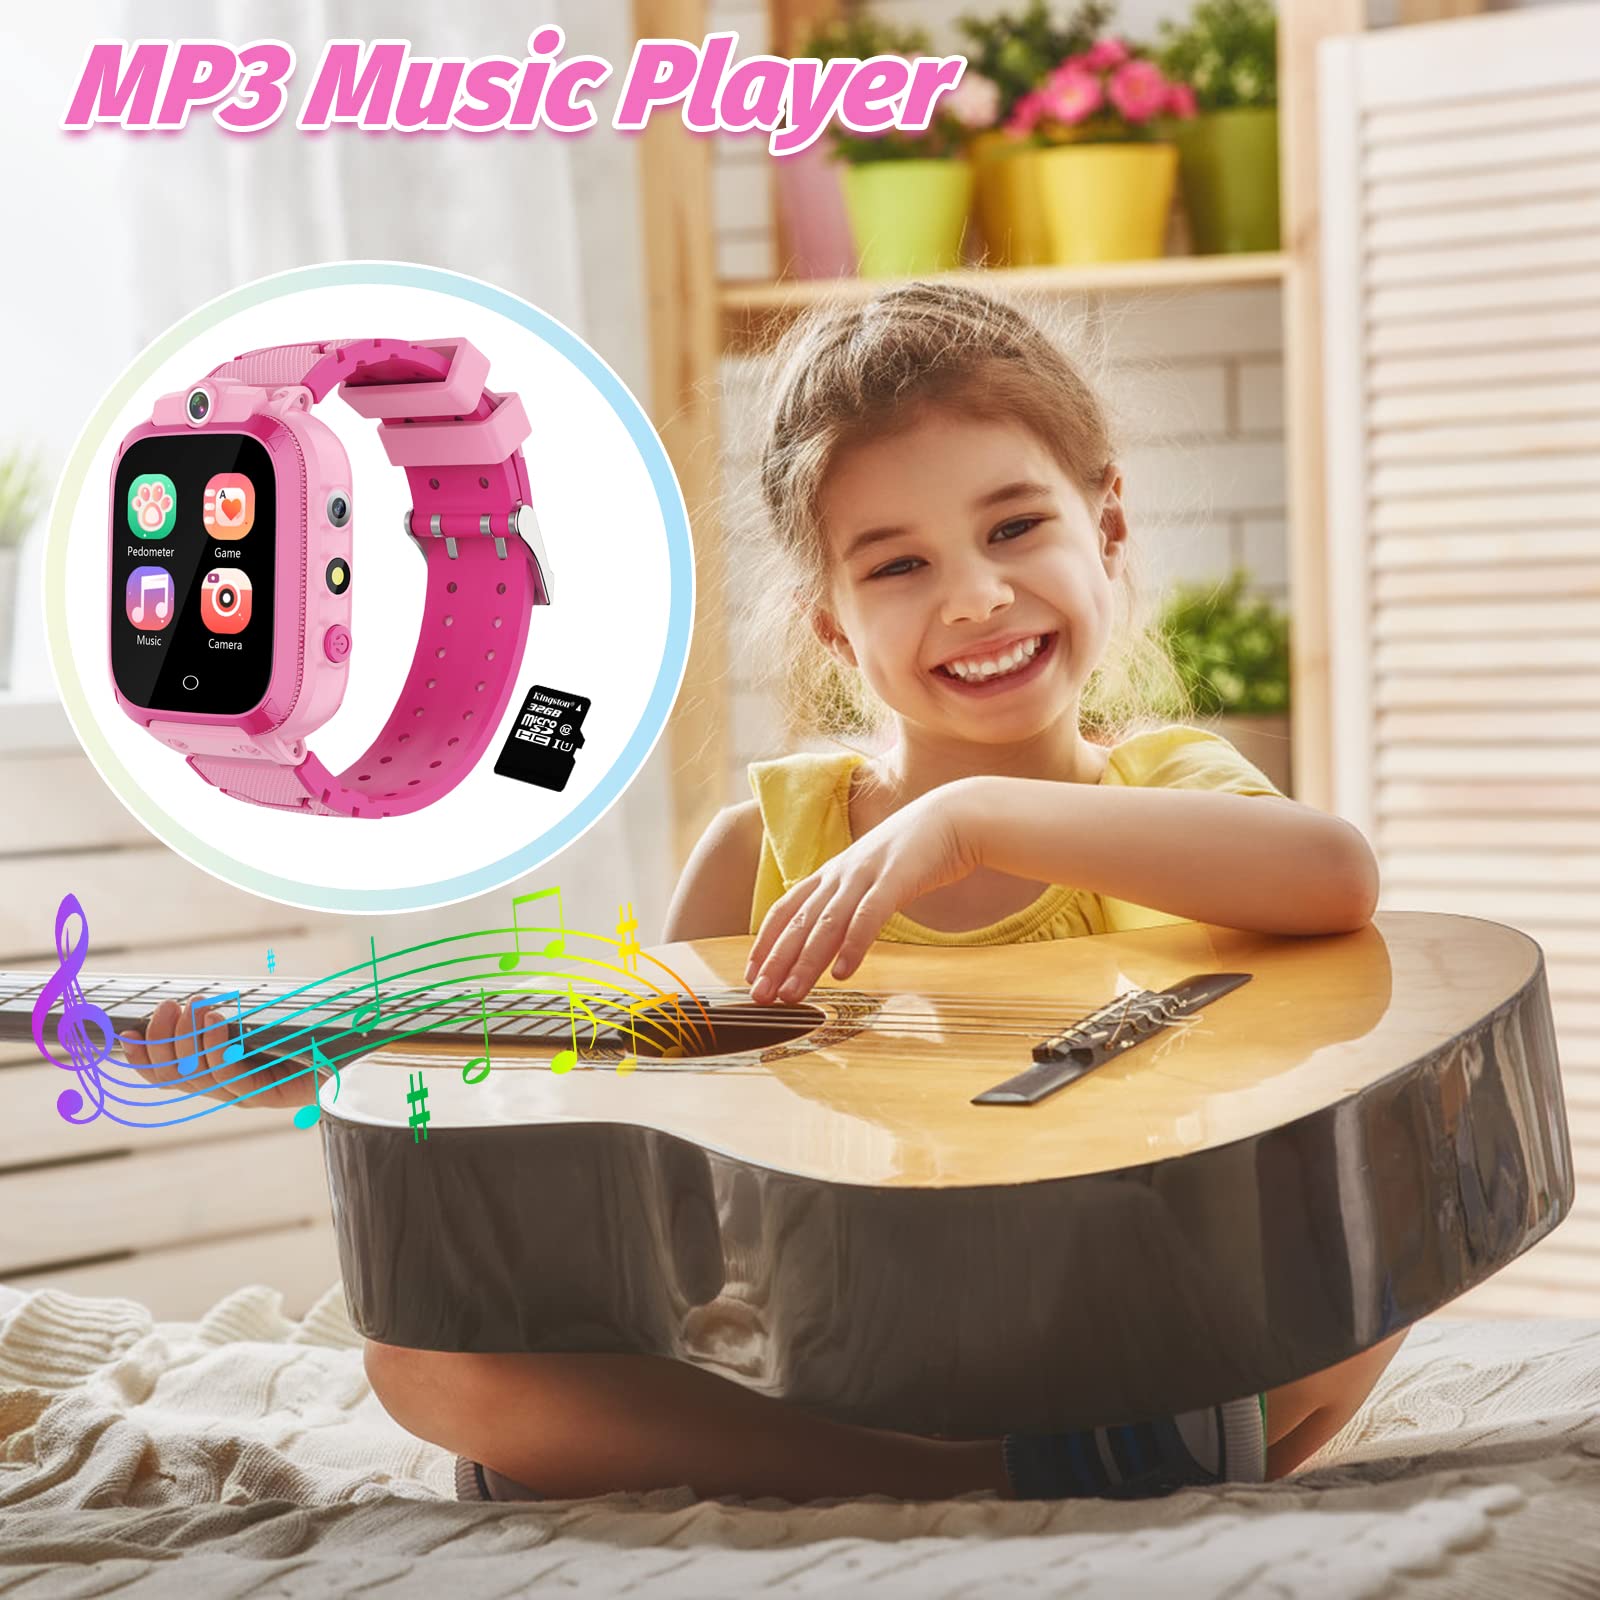 Kids Smart Watch for Girls Boys Ages 3-12 Years,Toddler Wrist Watch mp3 music player 14 Puzzle Games with Dual Cameras Video Player/Recorder Pedometer Torch Children Birthday Festival Gifts Toys